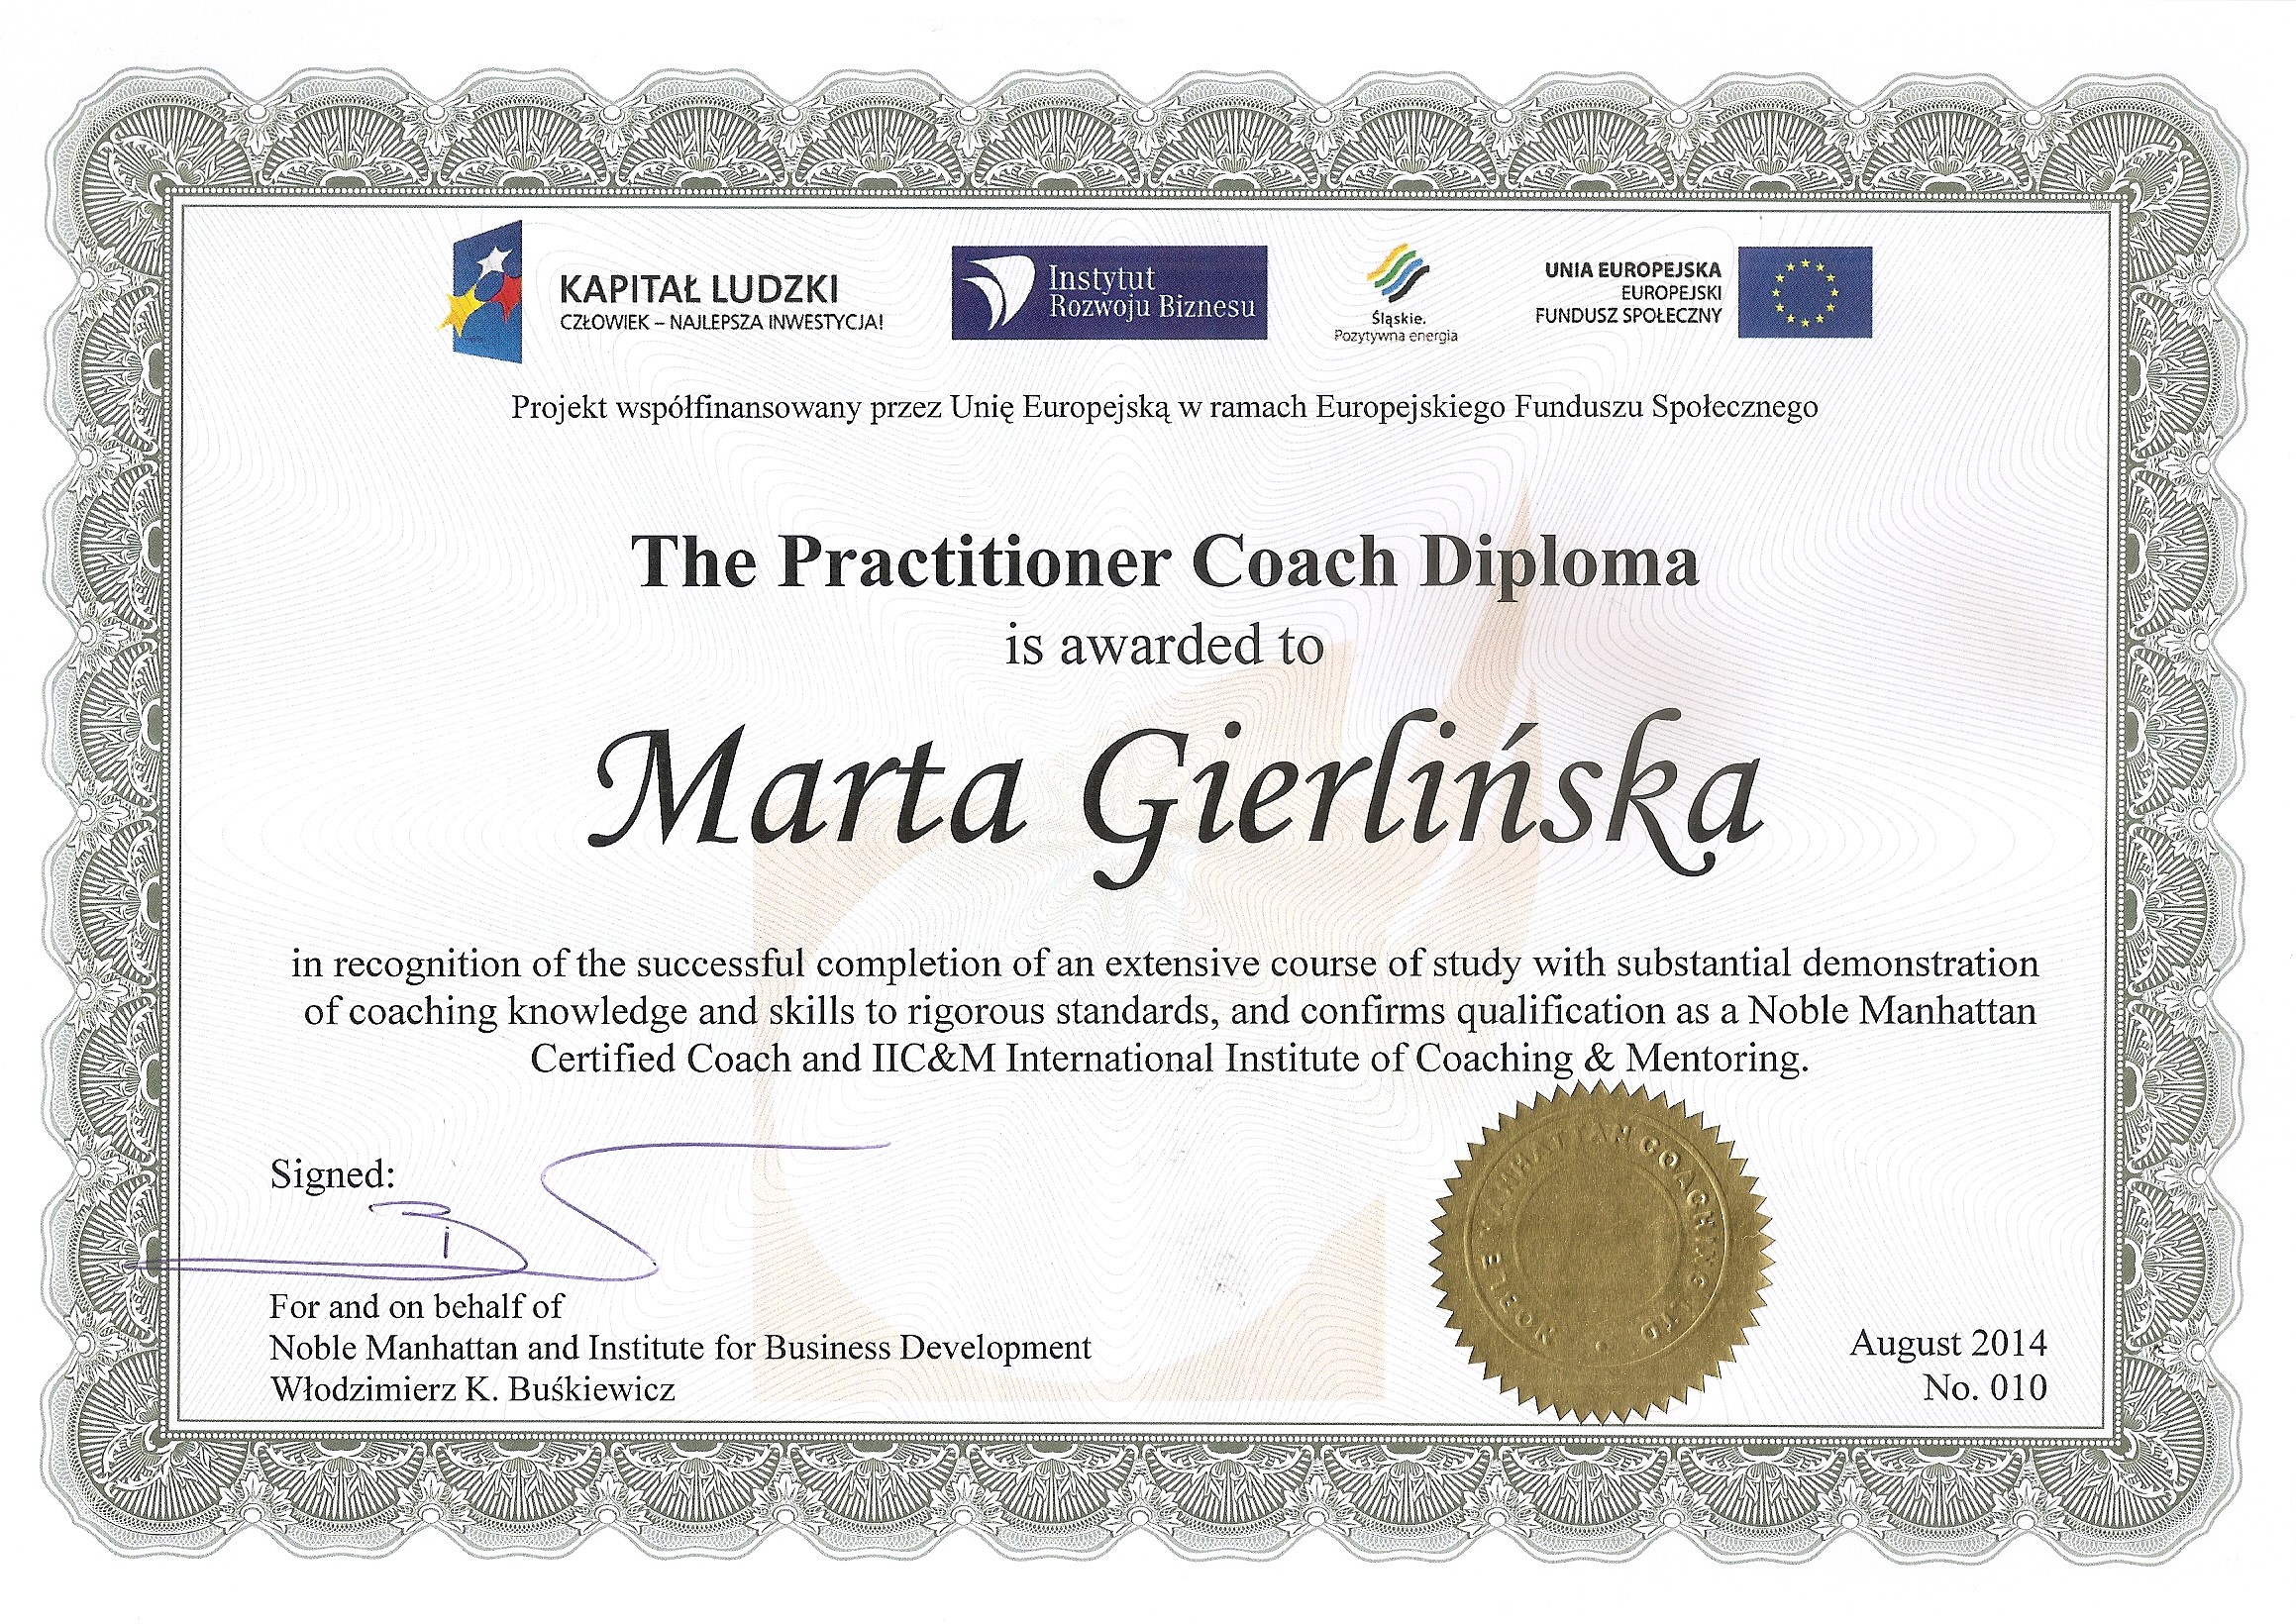 The Practitioner Coach Diploma